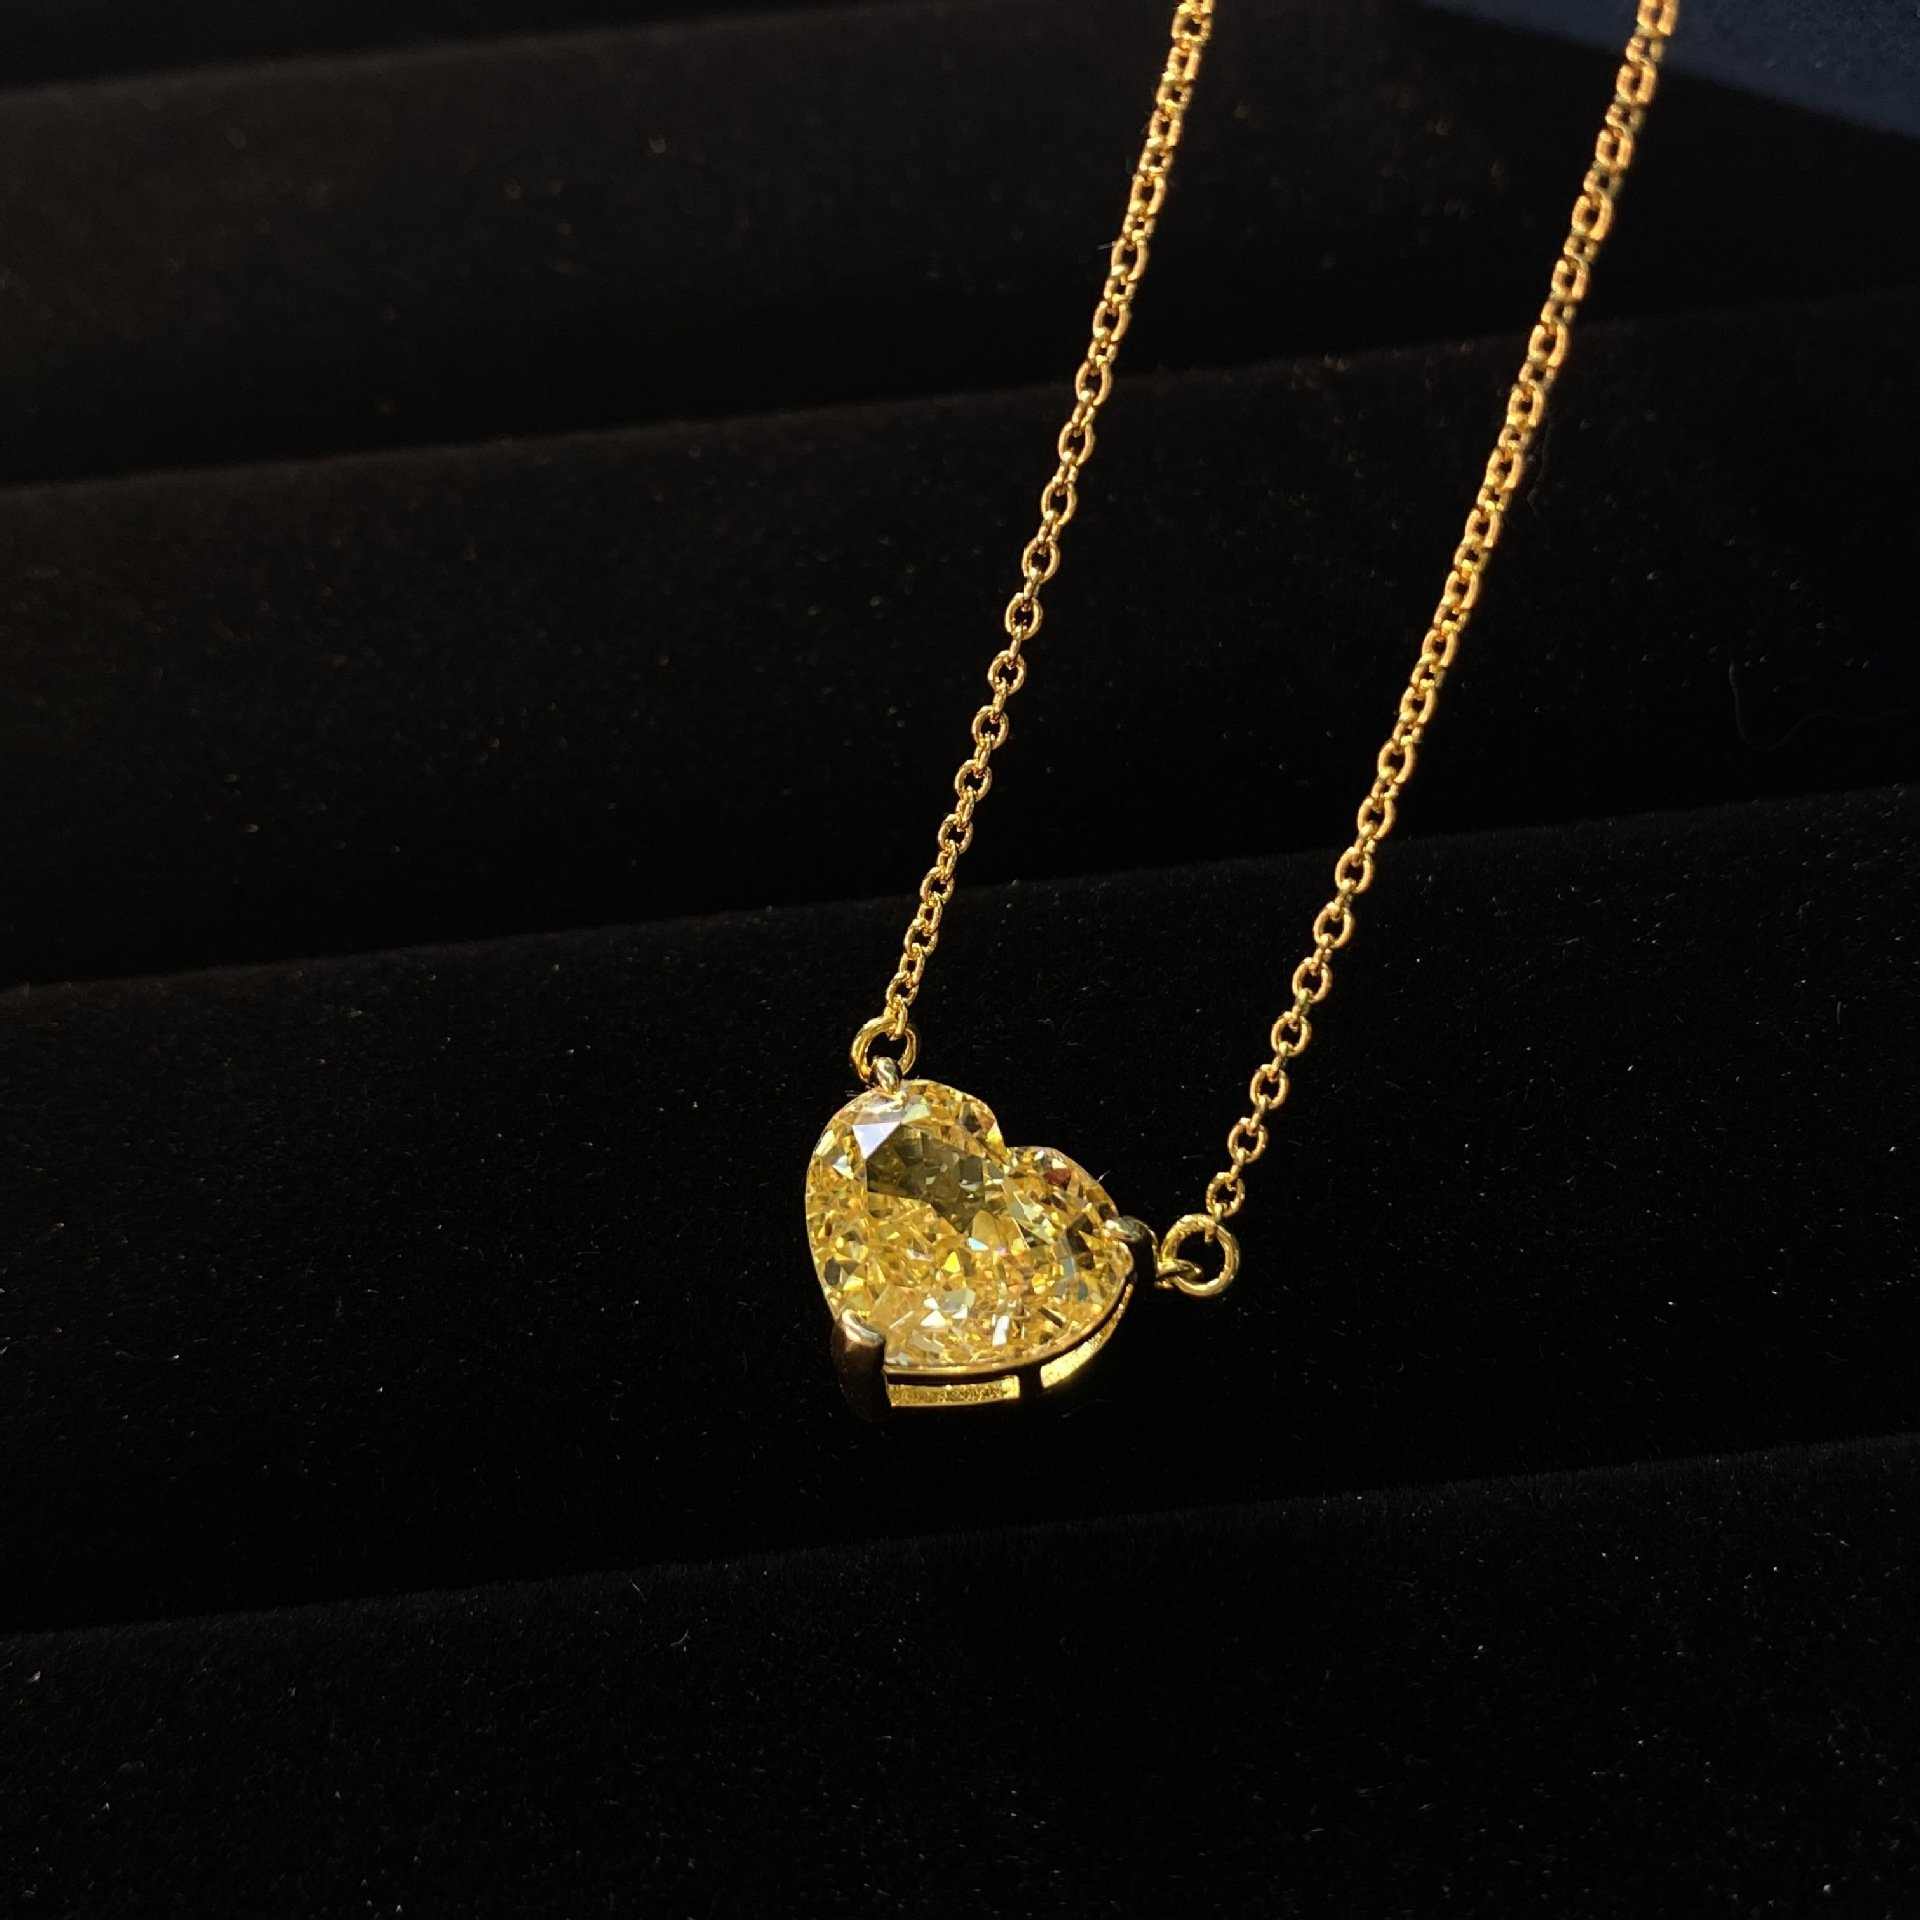 Heart Shaped Diamond Necklace - HERS